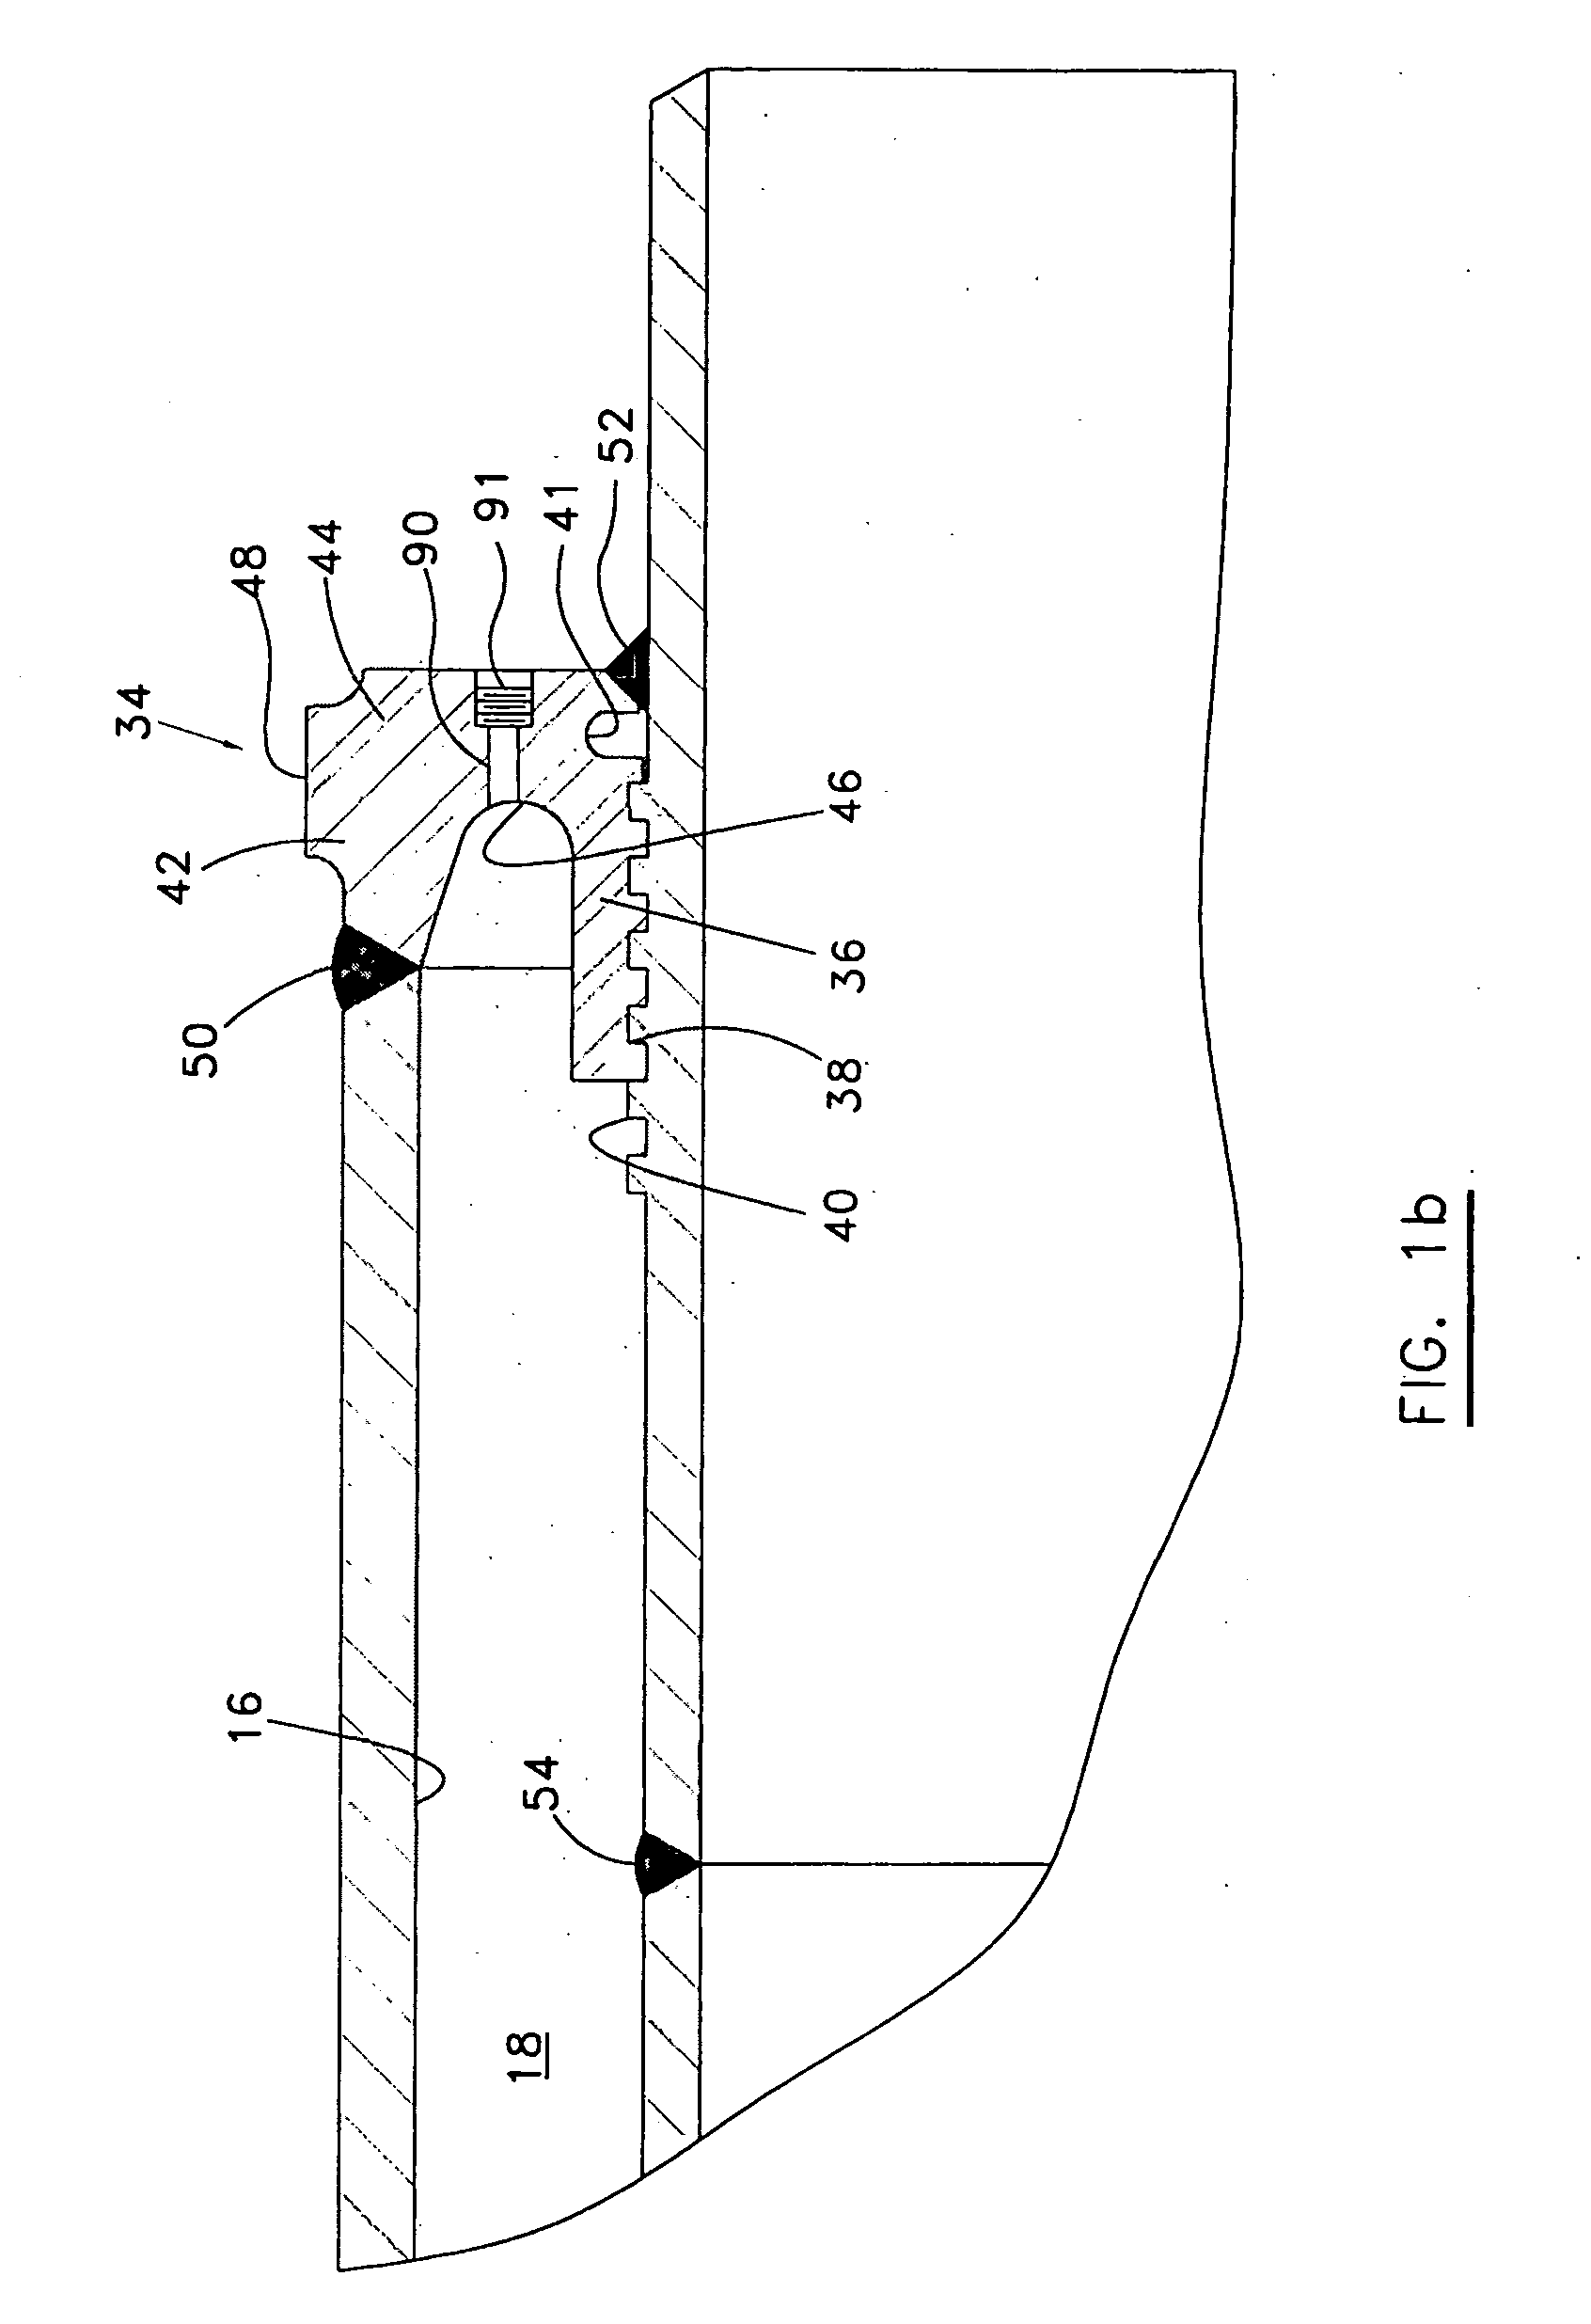 Dual-walled piping system and methods